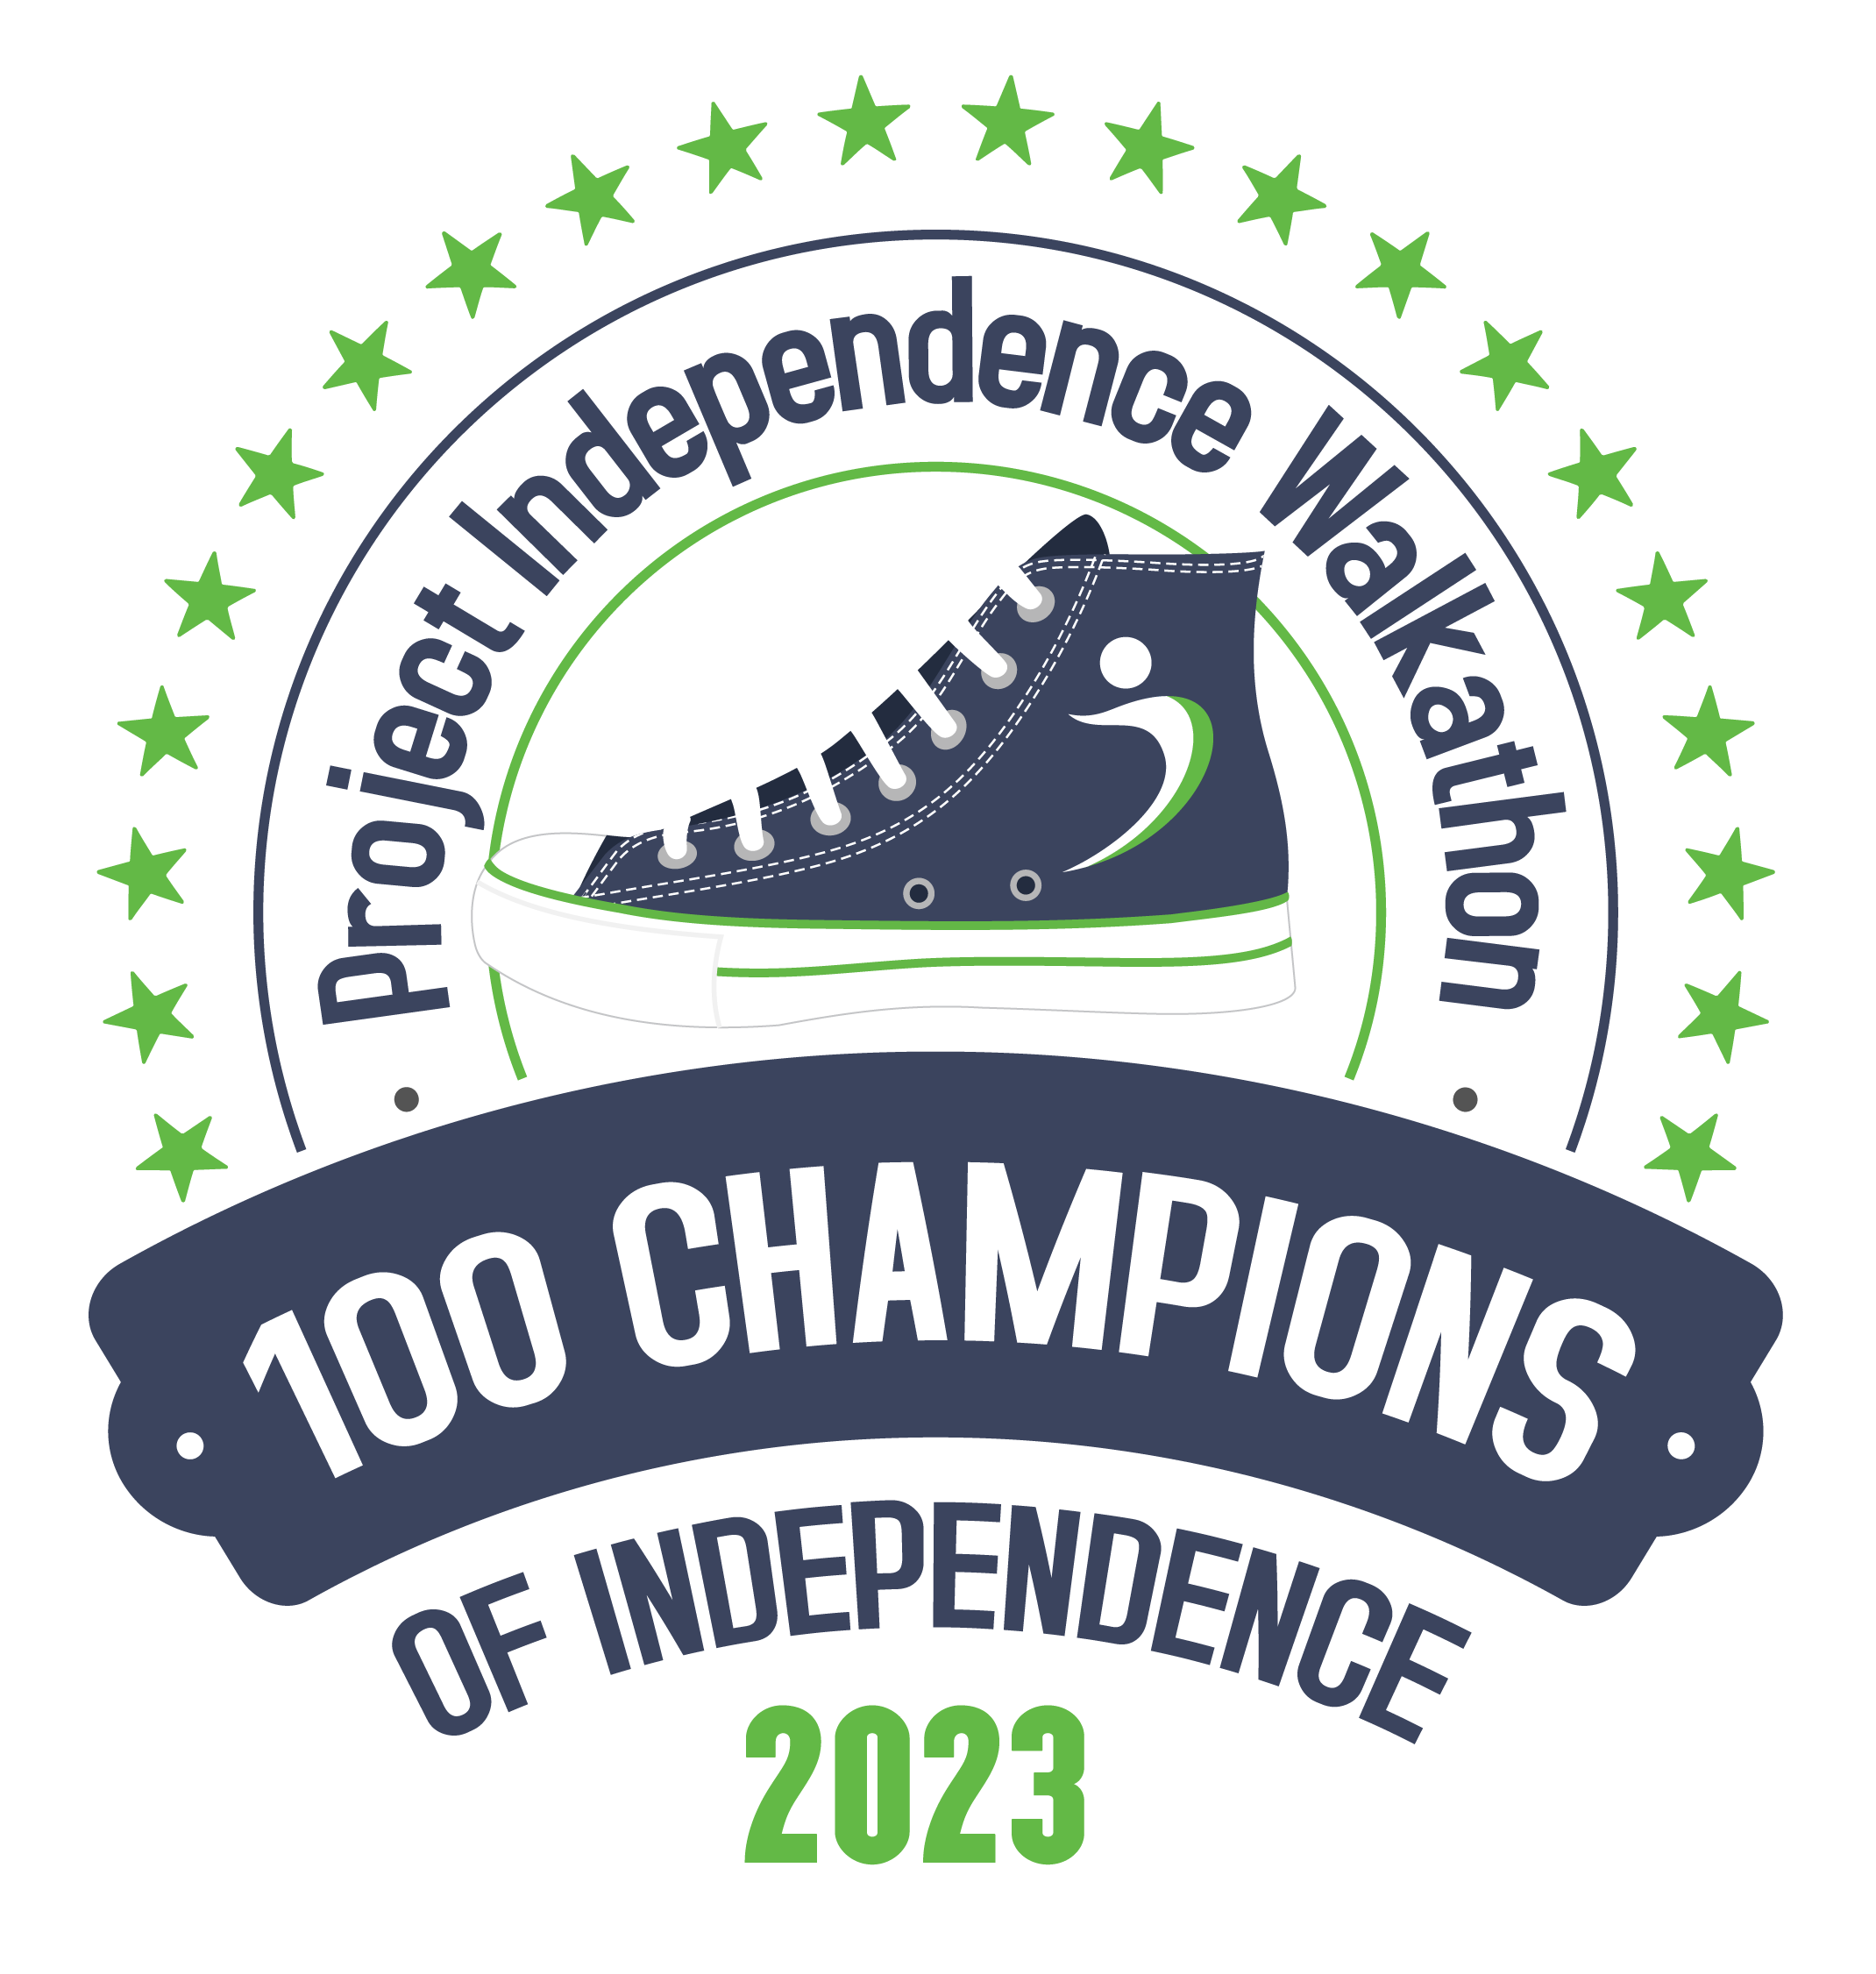 100 Champions of Independence | Project Independence Walkathon